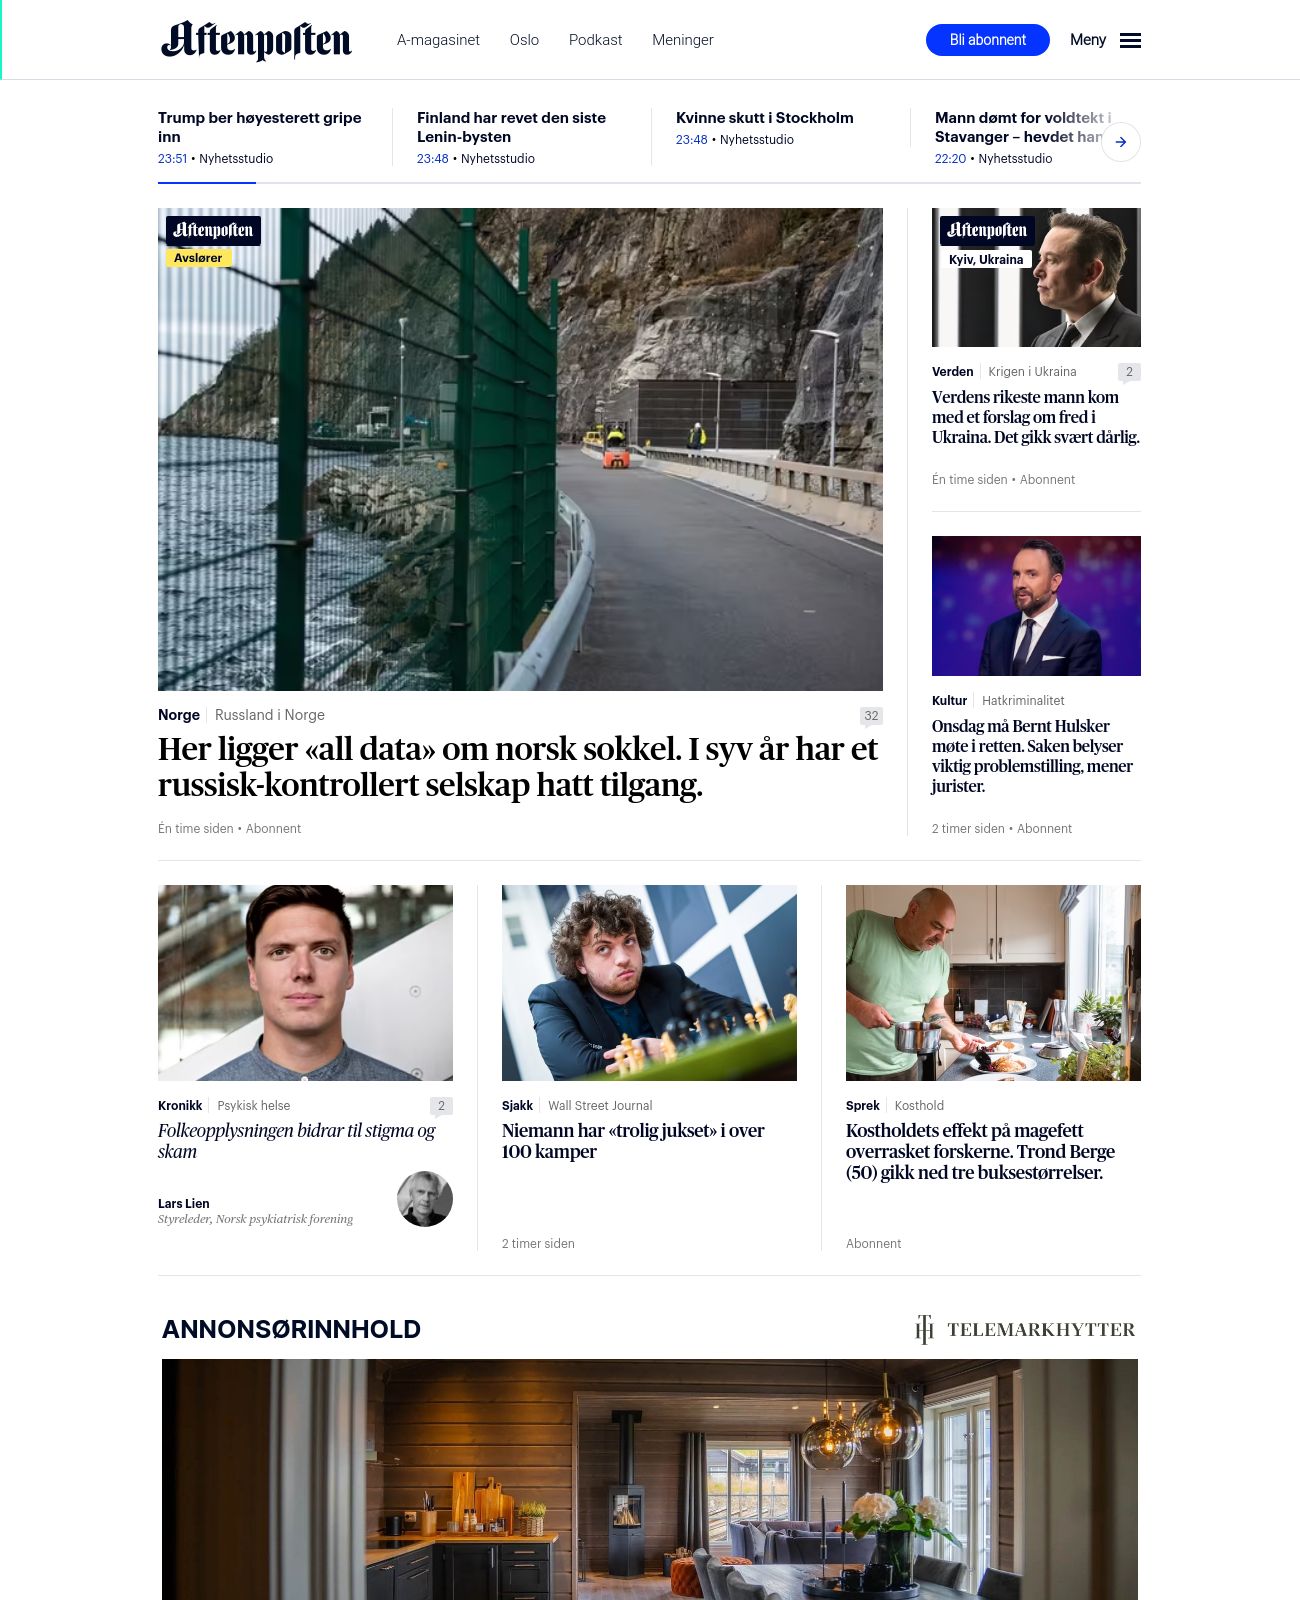 Aftenposten at 2022-10-05 00:59:01+02:00 local time